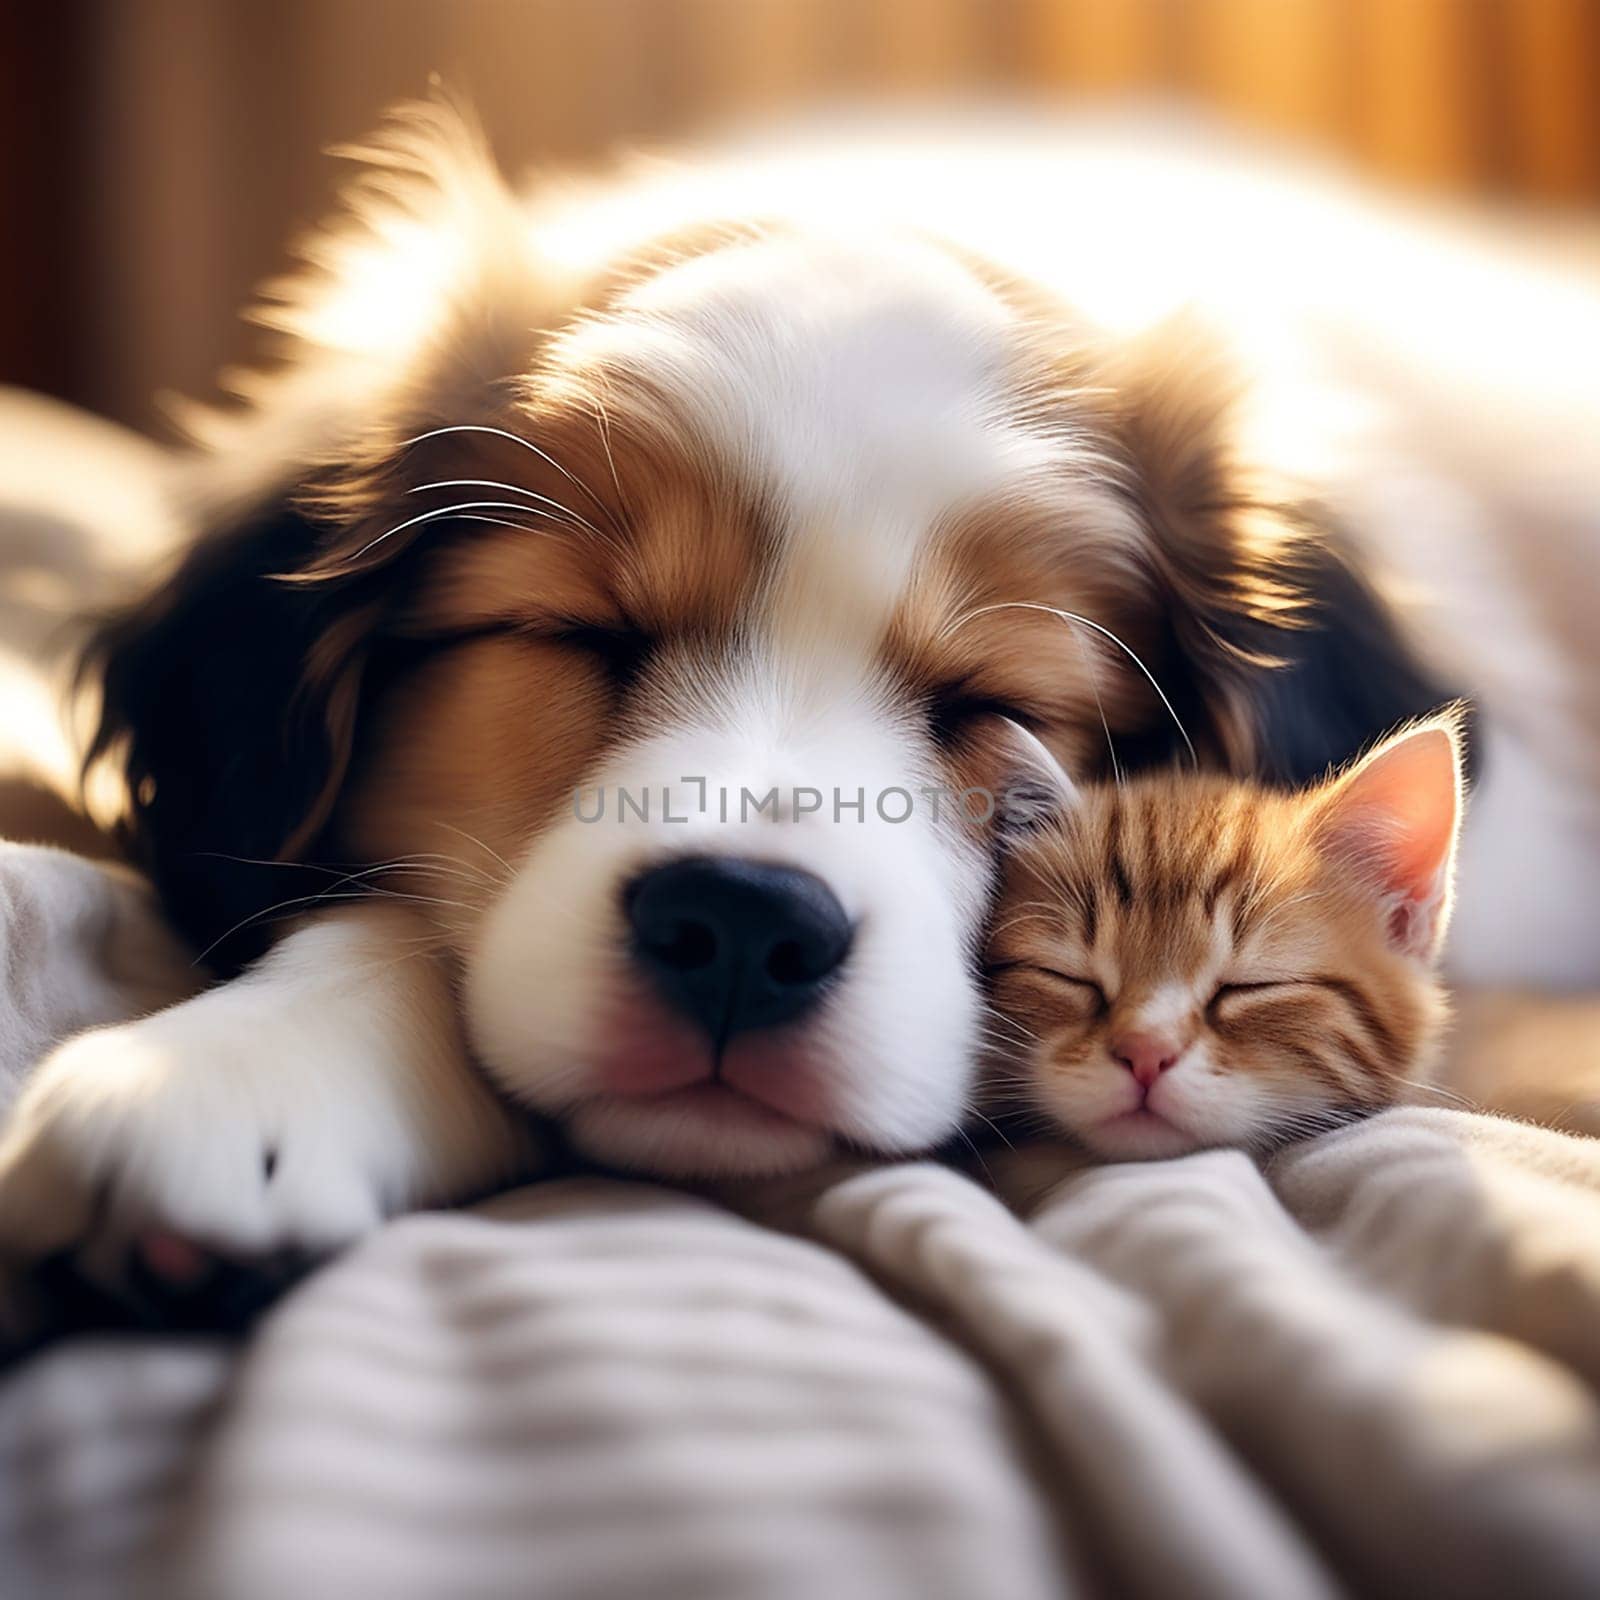 A Bond of Love: Cat and Dog Sleeping Together, Kitten and Puppy Taking a Nap